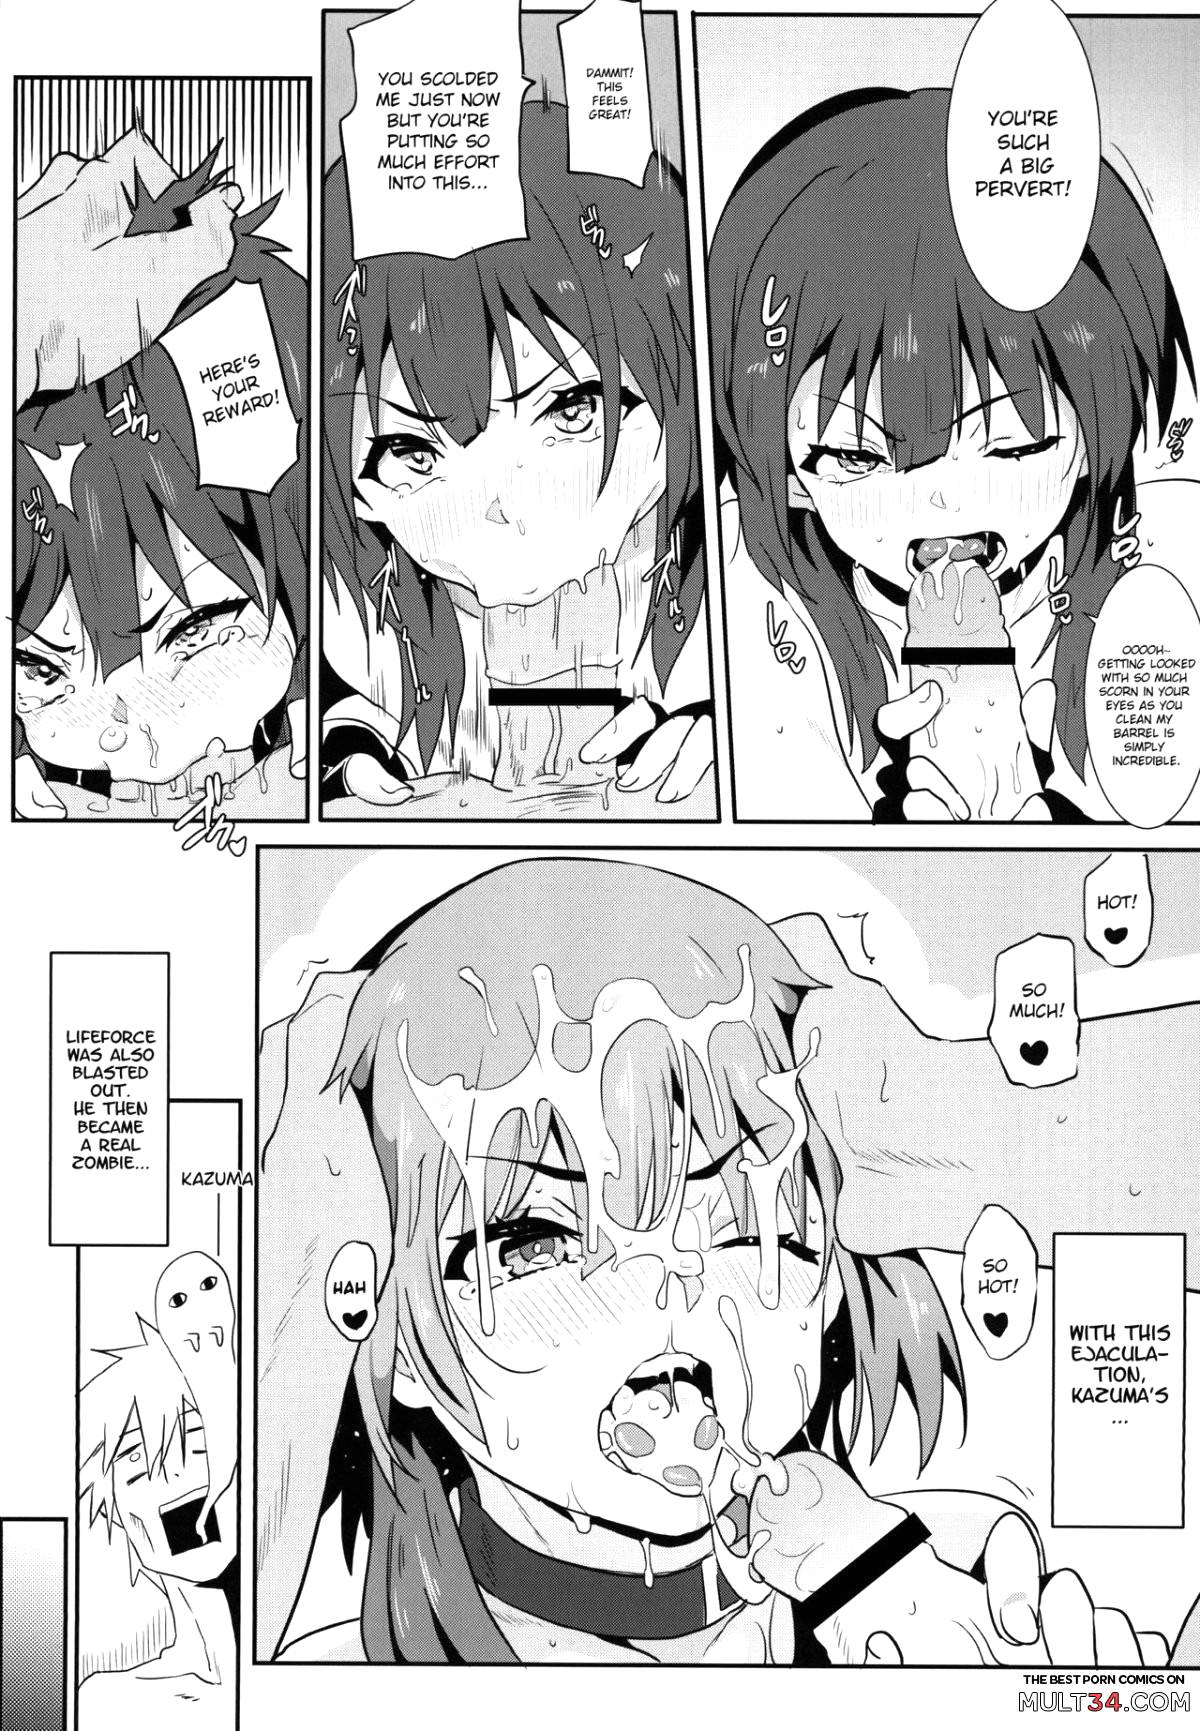 Blessing Megumin with a Magnificence Explosion! 4 page 17